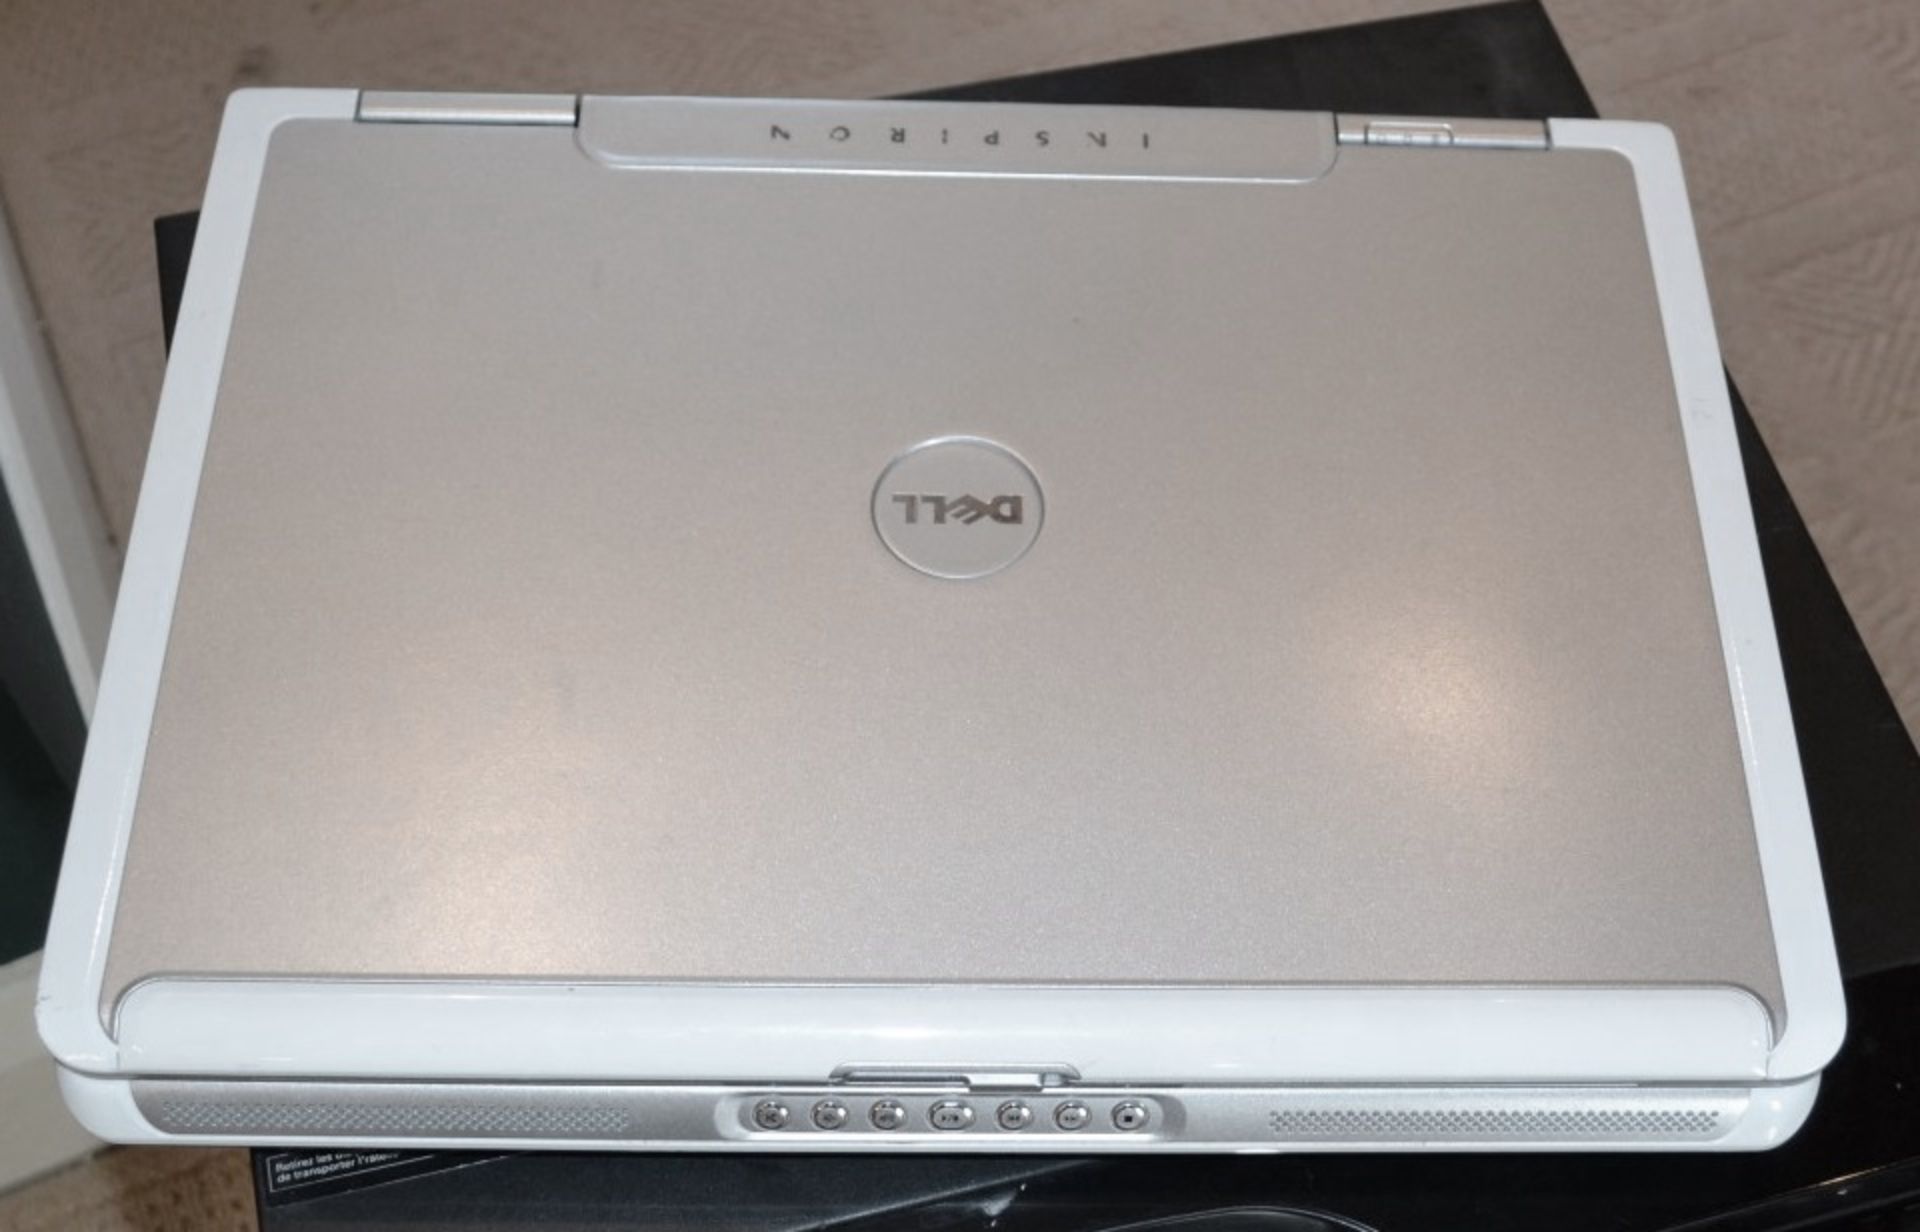 1 x Dell Inspiron 9400 17" Laptop With PSU **No Hard Drive** Preowned In Good Condition - Ref: - Image 2 of 3